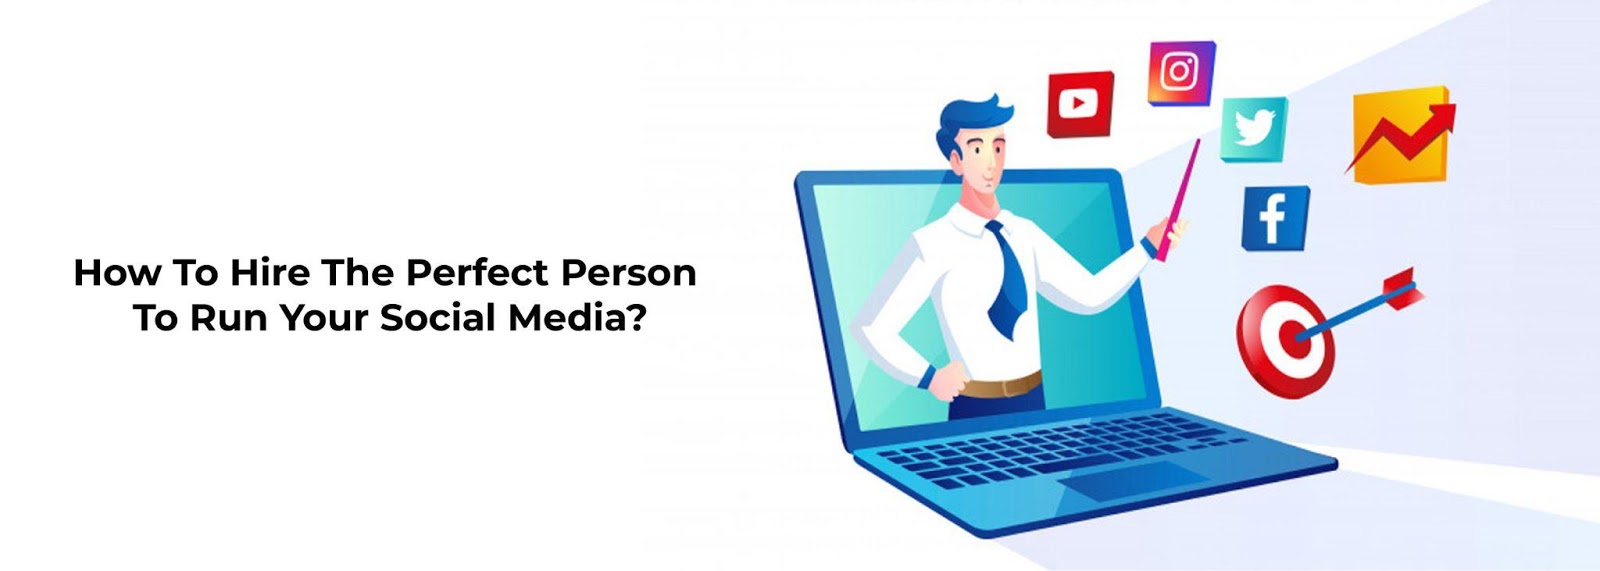 How To Hire The Perfect Person for Your Social Media?